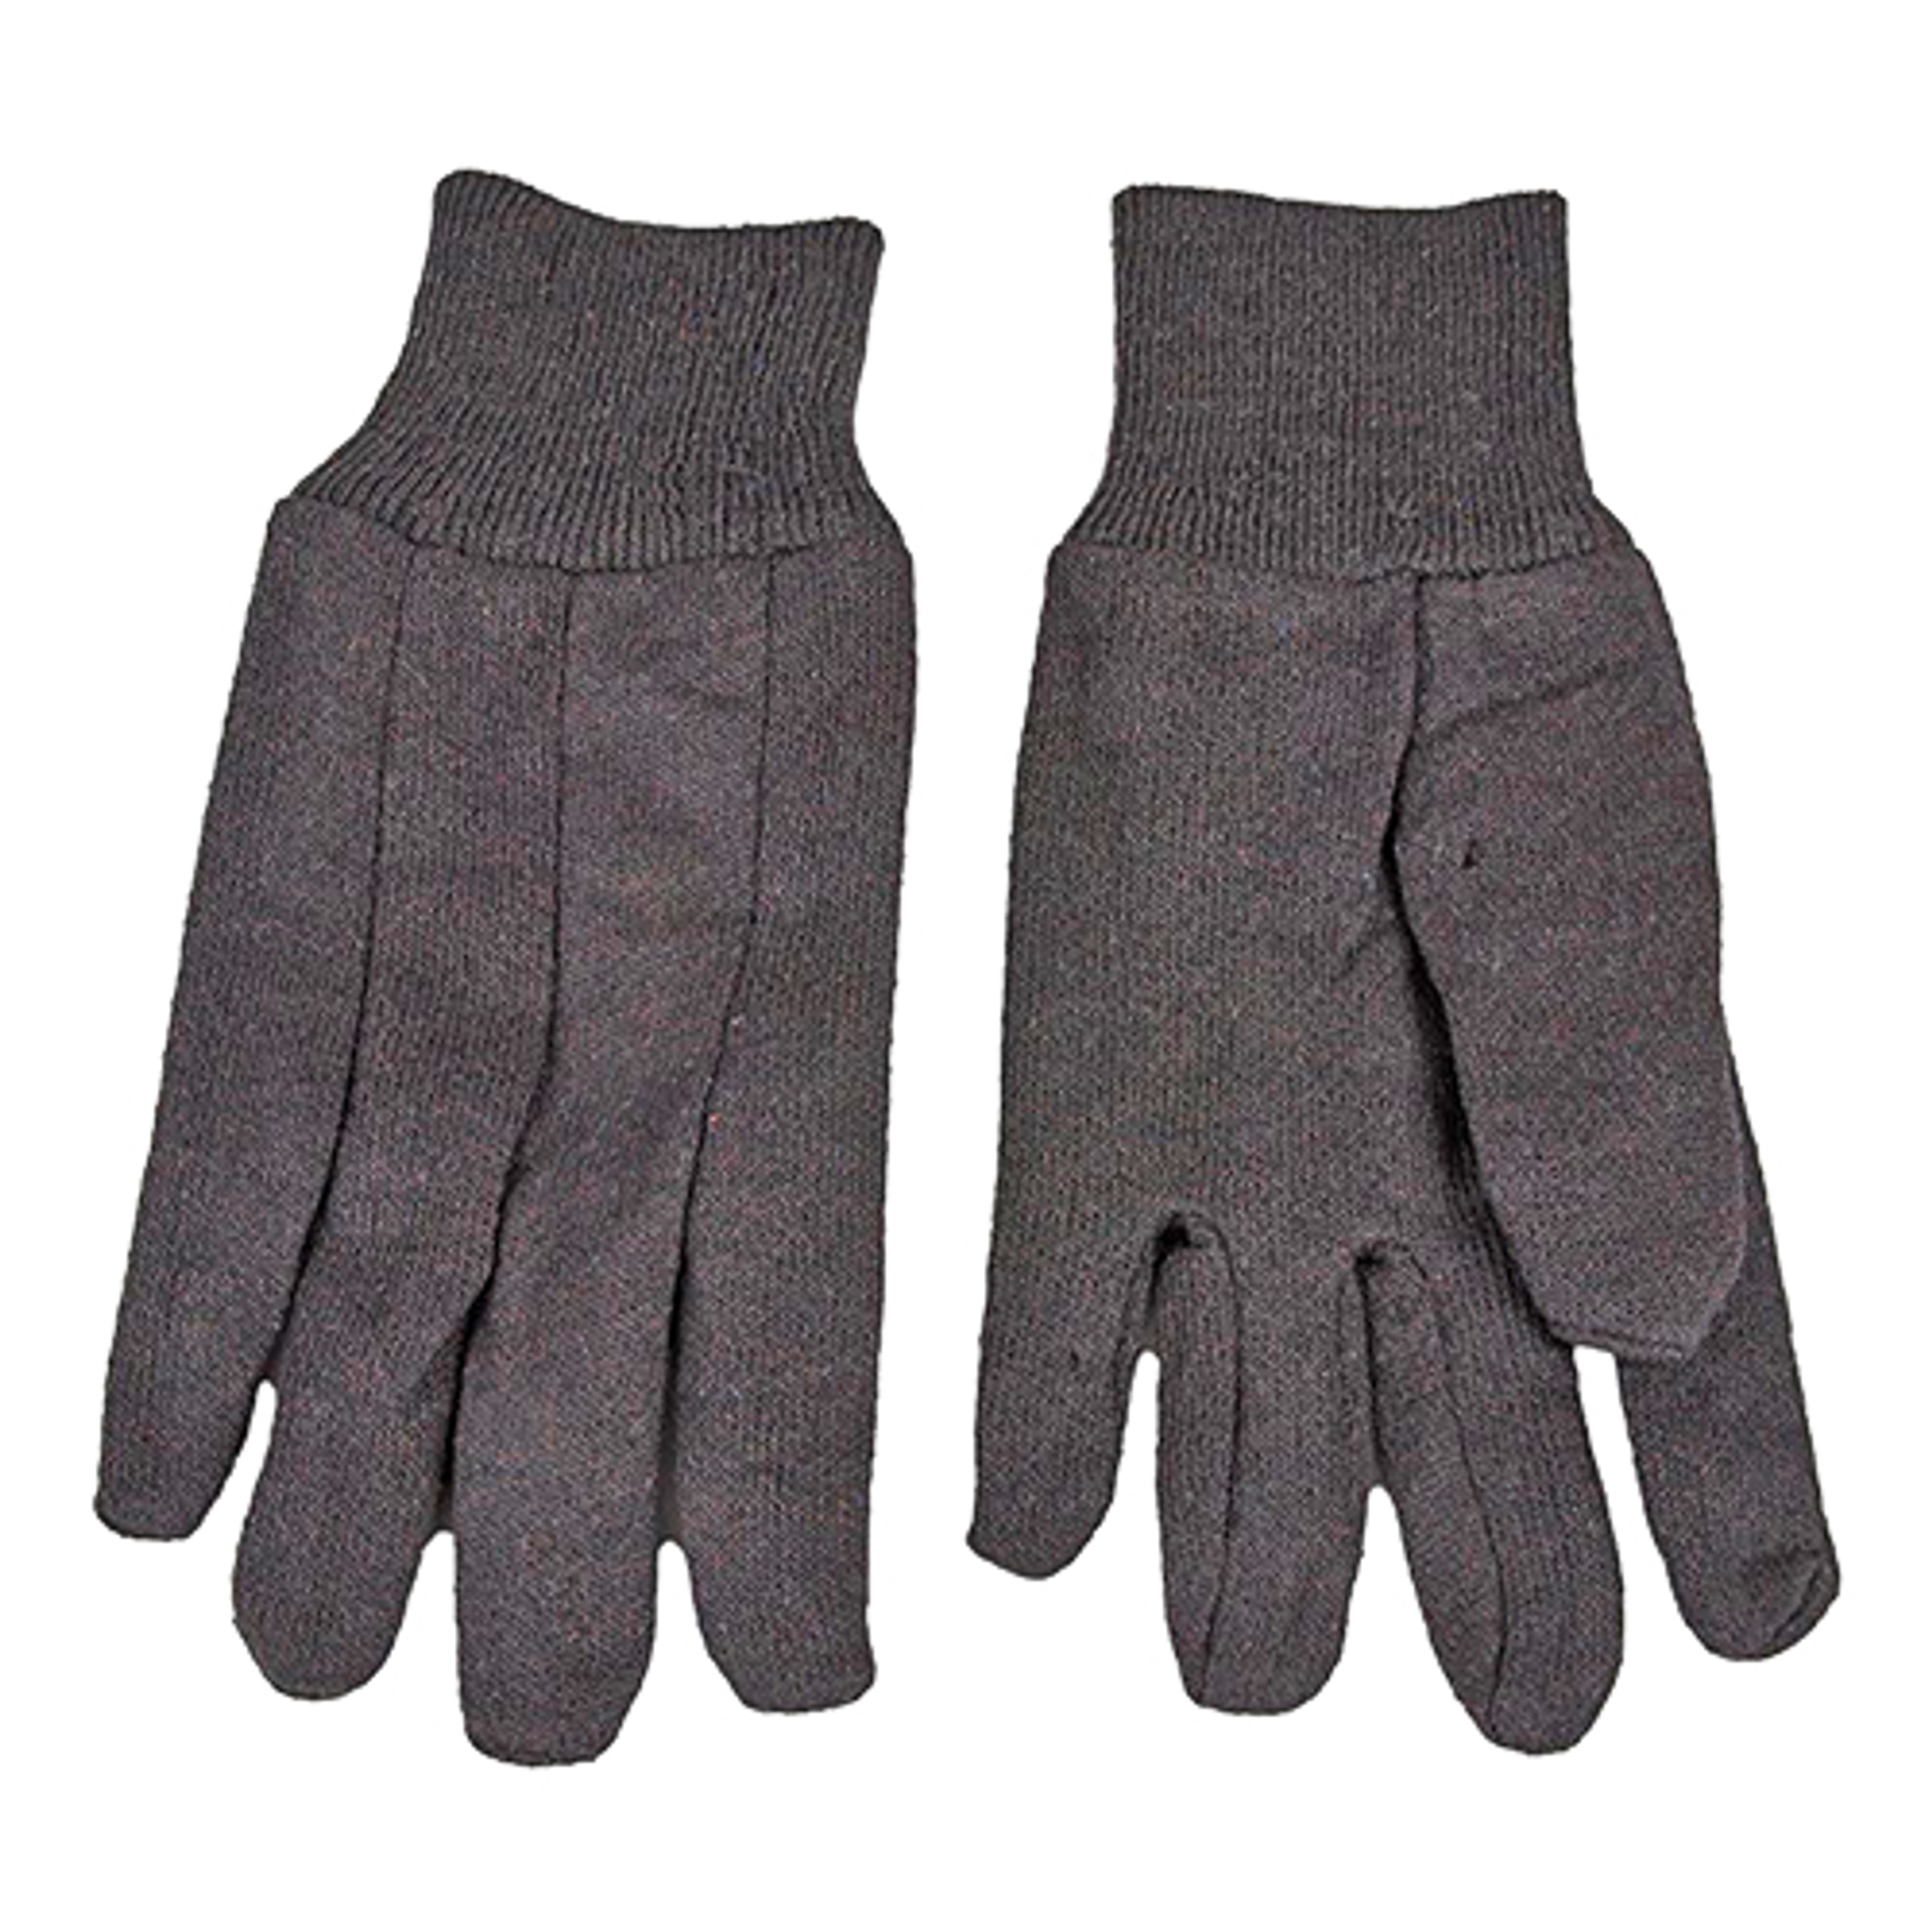 Forney Jersey Work Gloves, Small/Medium - Midwest Technology Products